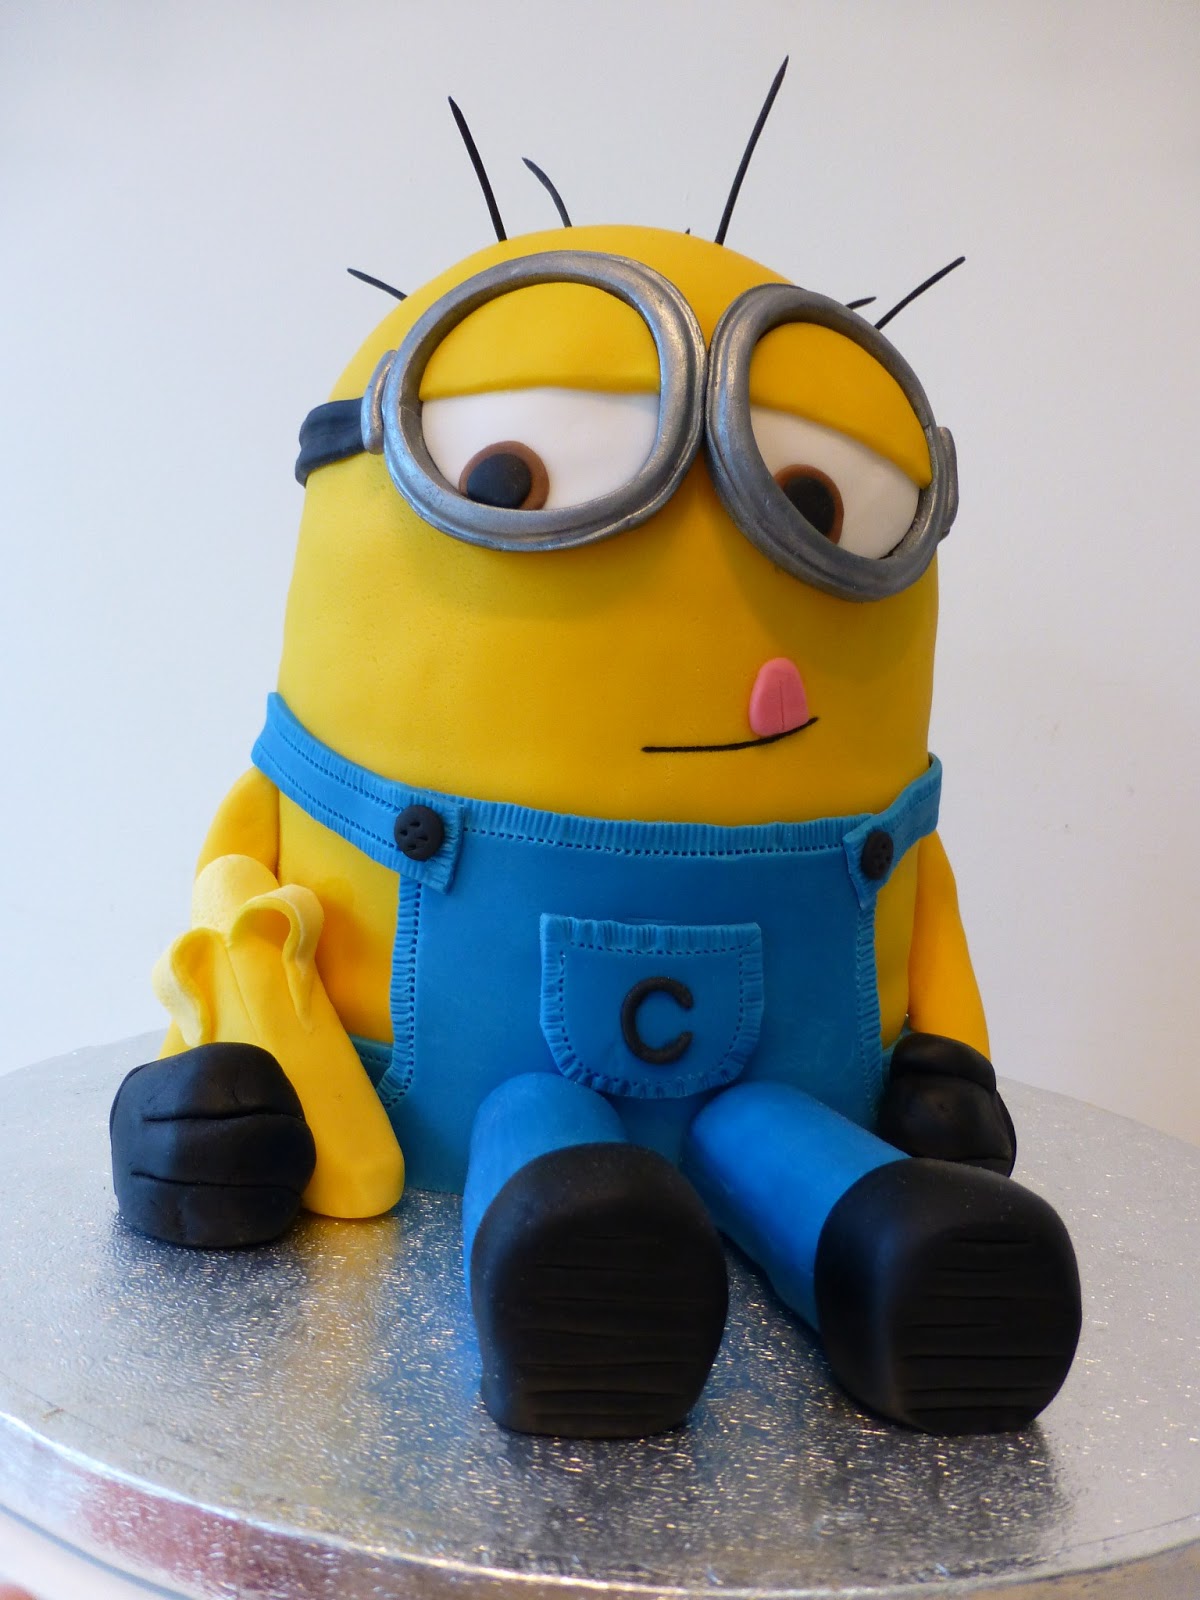 What An Awesome Cake Despicable Me Minion Cake